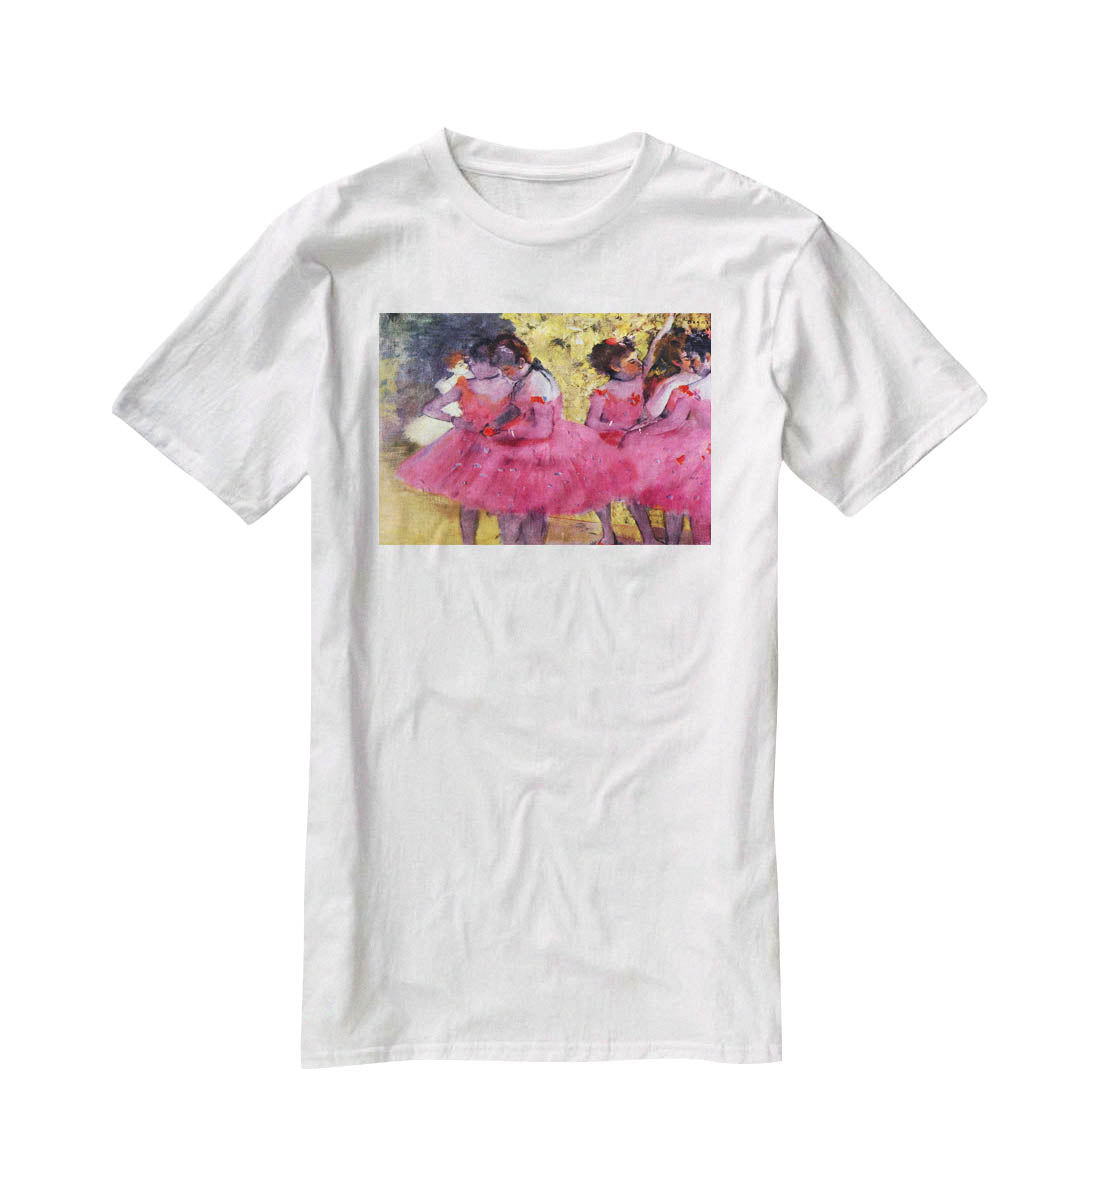 Dancers in pink between the scenes by Degas T-Shirt - Canvas Art Rocks - 5